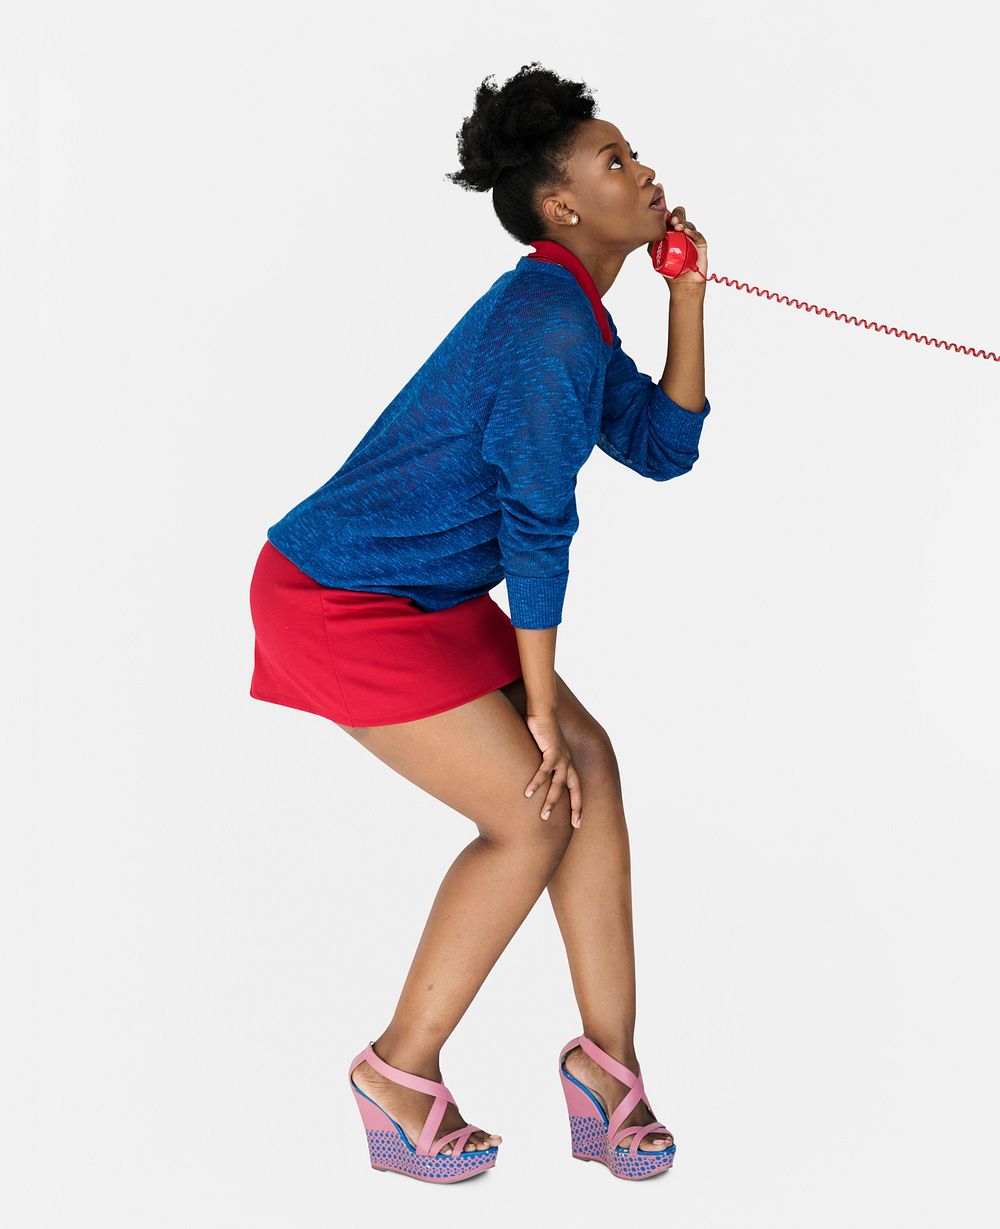 Studio portrait of a young woman bending her knees while talking on the phone